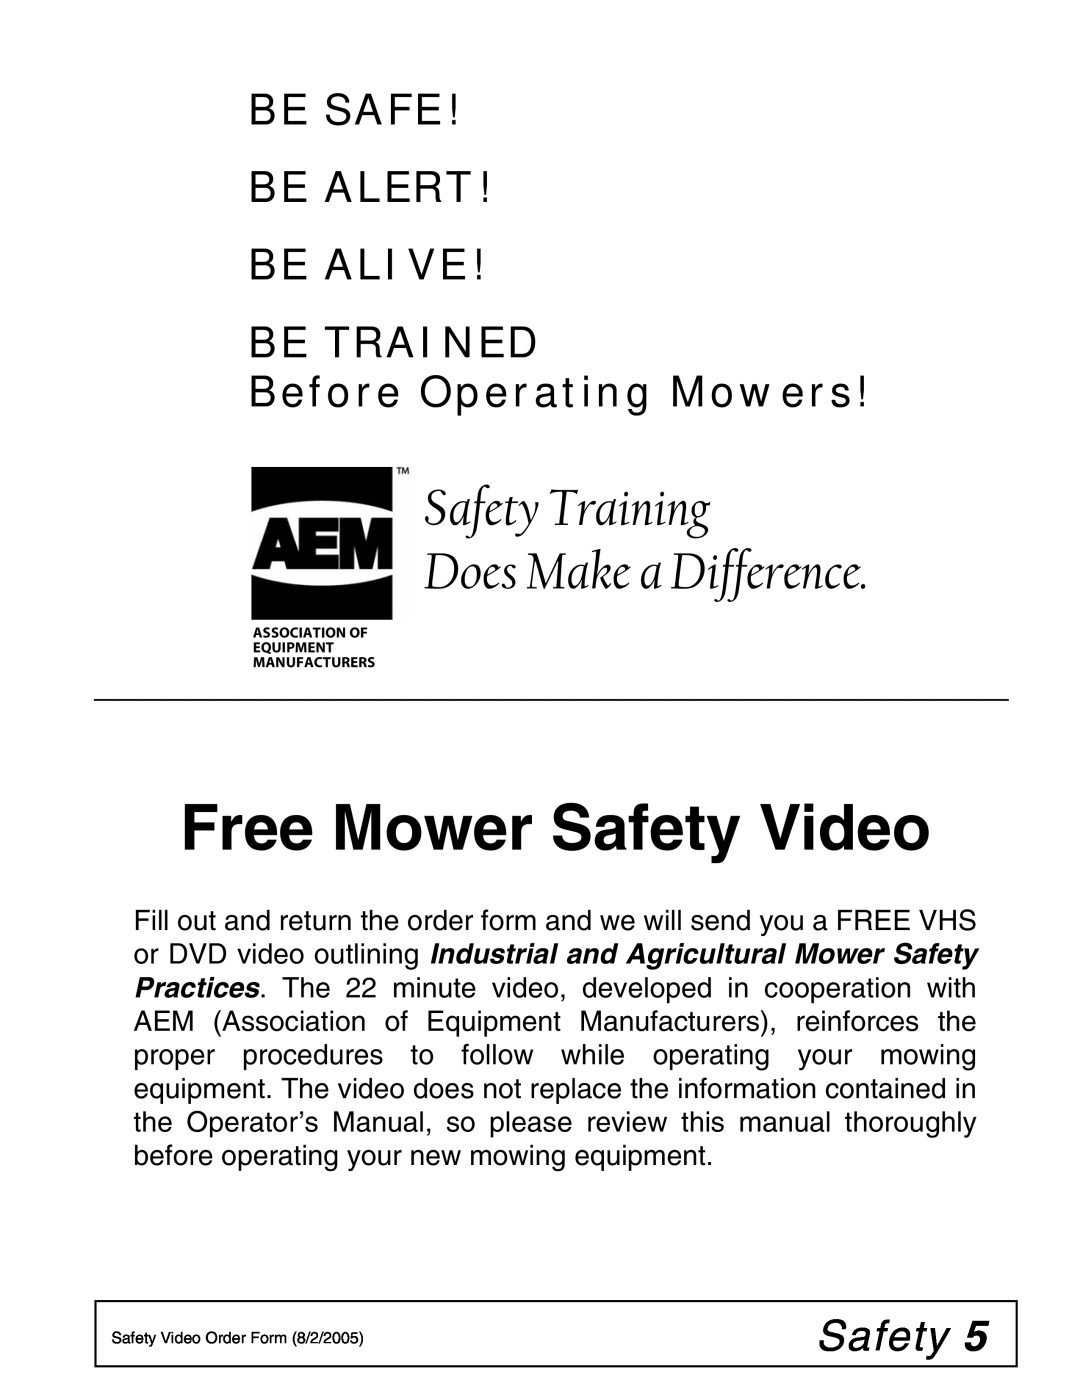 Woods Equipment BW15LH manual Free Mower Safety Video, Safety Training Does Make a Difference, Before Operating Mowers 